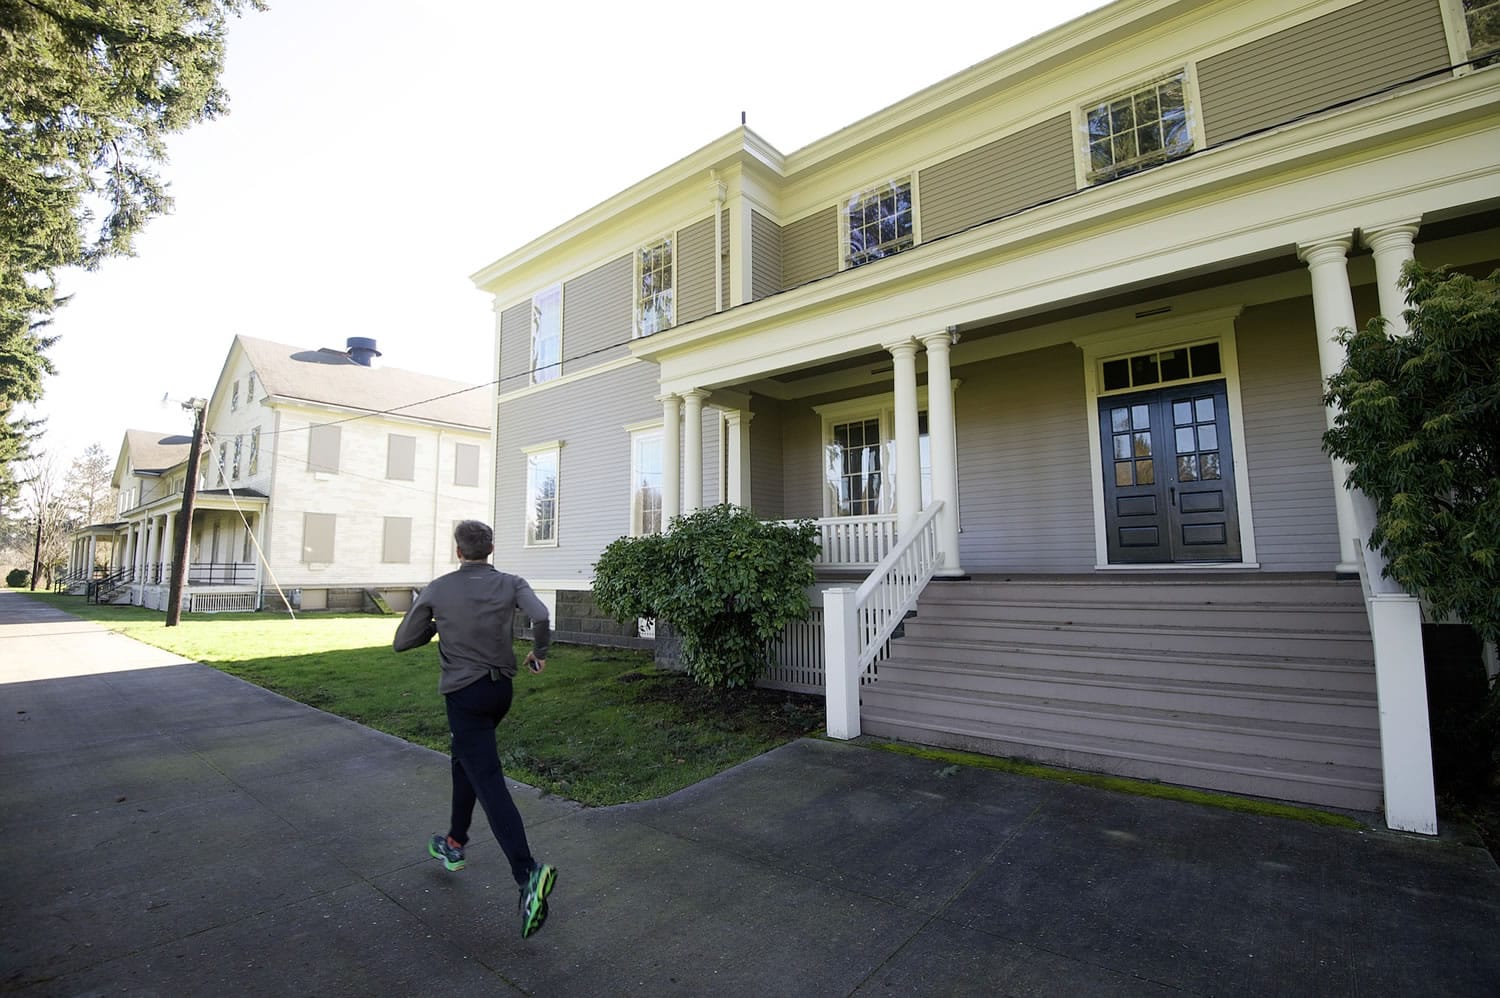 Photos by Steven Lane/The Columbian
The National Park Service has announced plans to renovate three &quot;front row&quot; barracks buildings at Fort Vancouver National Historic Site. A jogger Thursday goes past a smaller building, rehabbed in 2013, that shows what the other structures will look like.